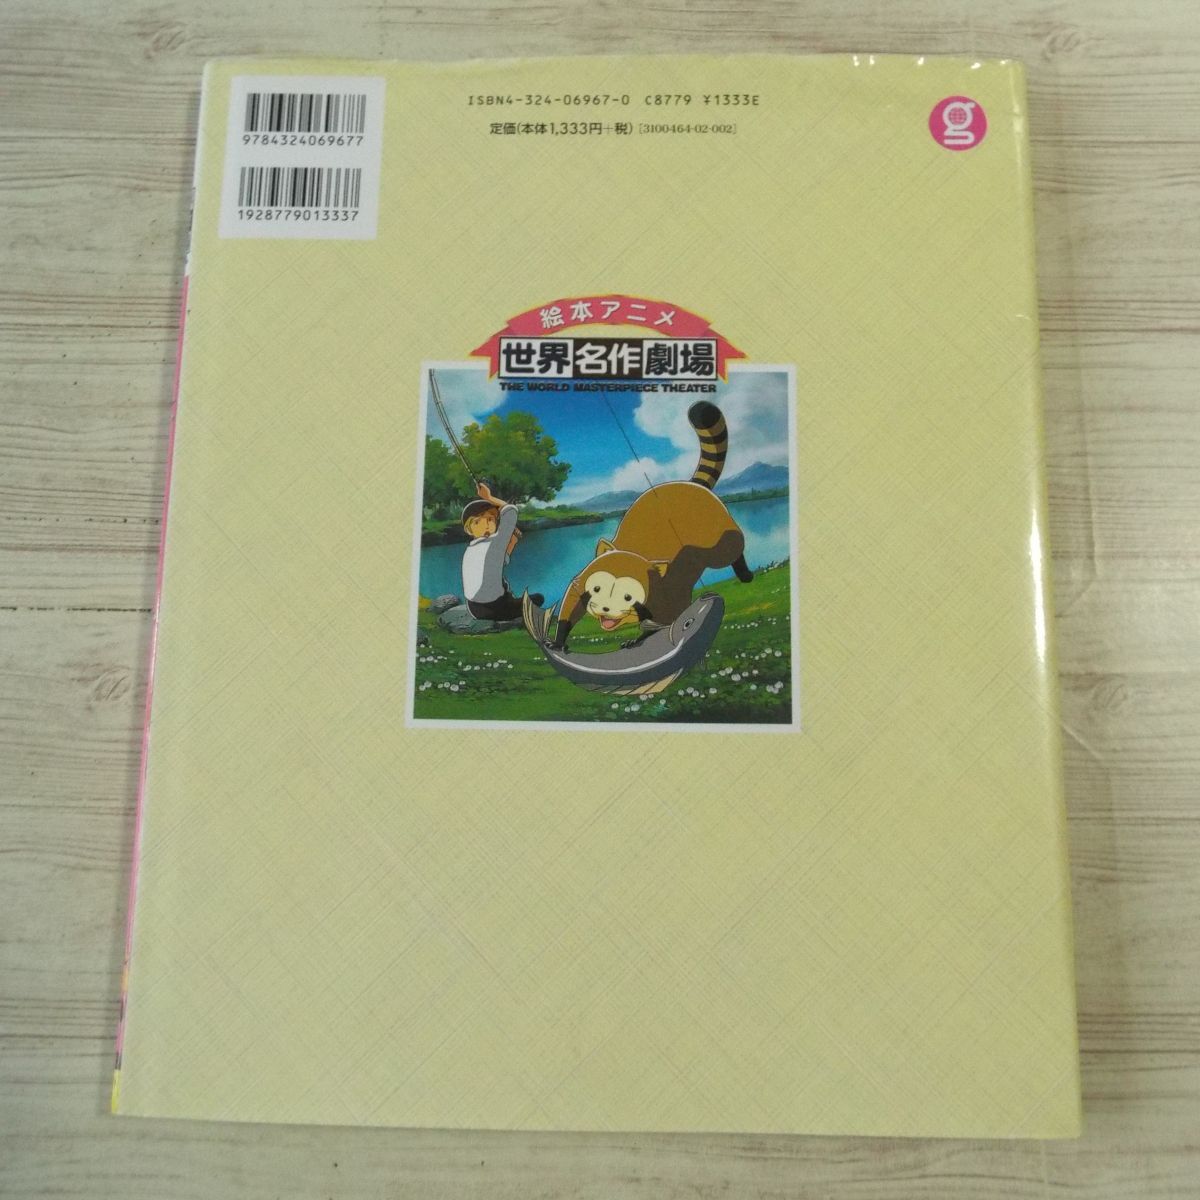  fairy tale [ picture book anime world masterpiece theater Rascal the Raccoon ] anime picture book ..... nostalgia anime 